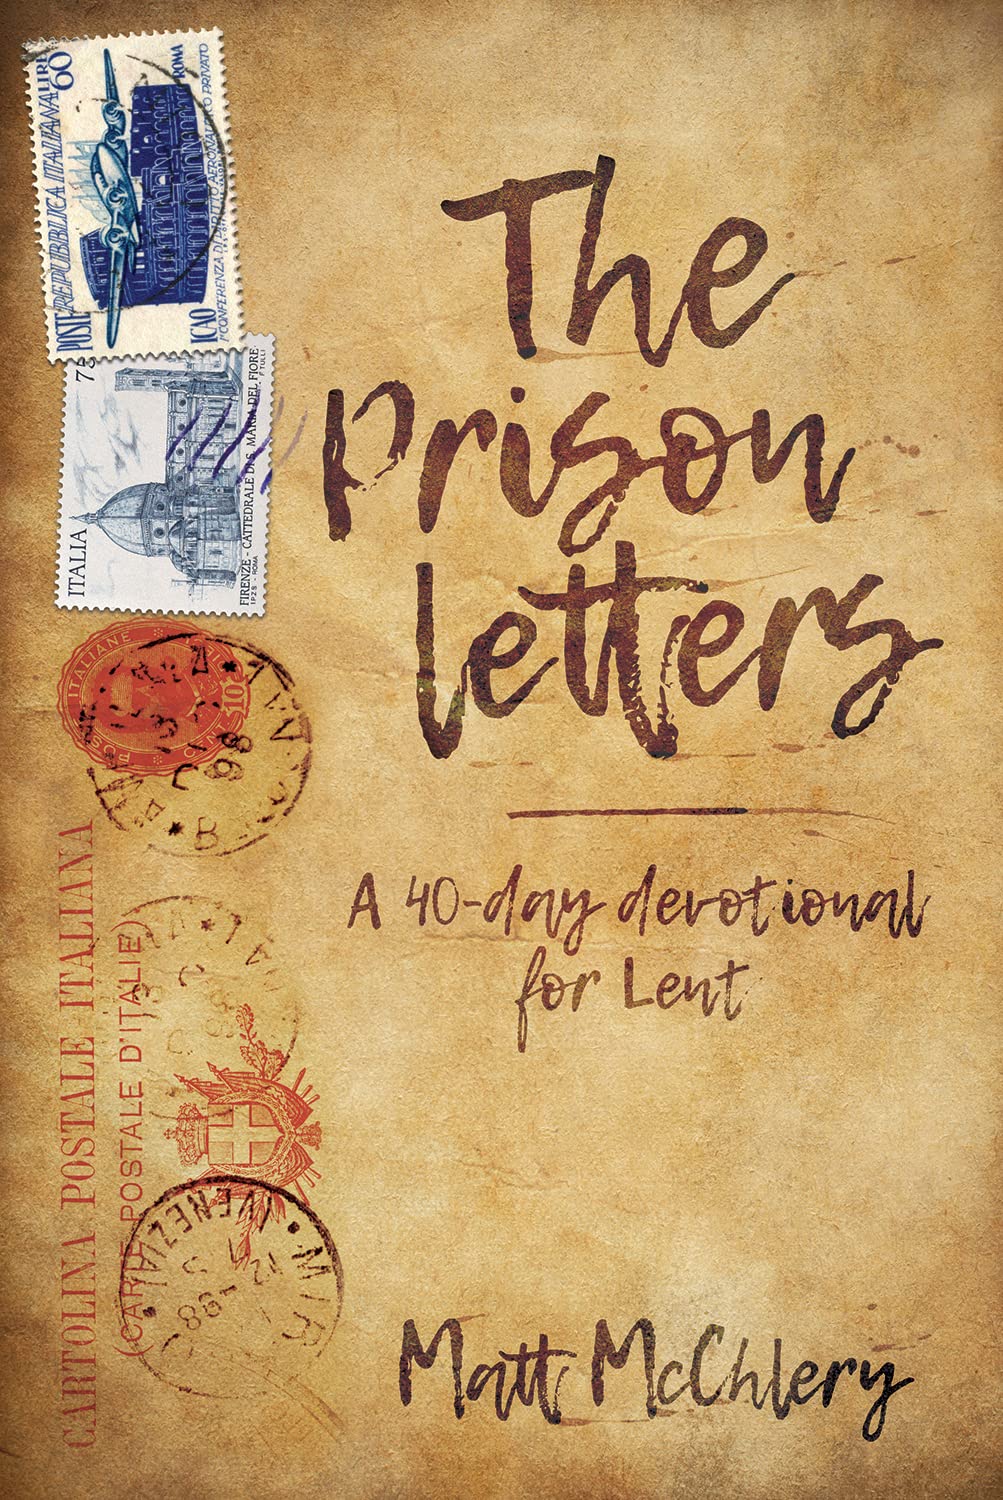 The Prison Letters: A 40-day devotional for Lent